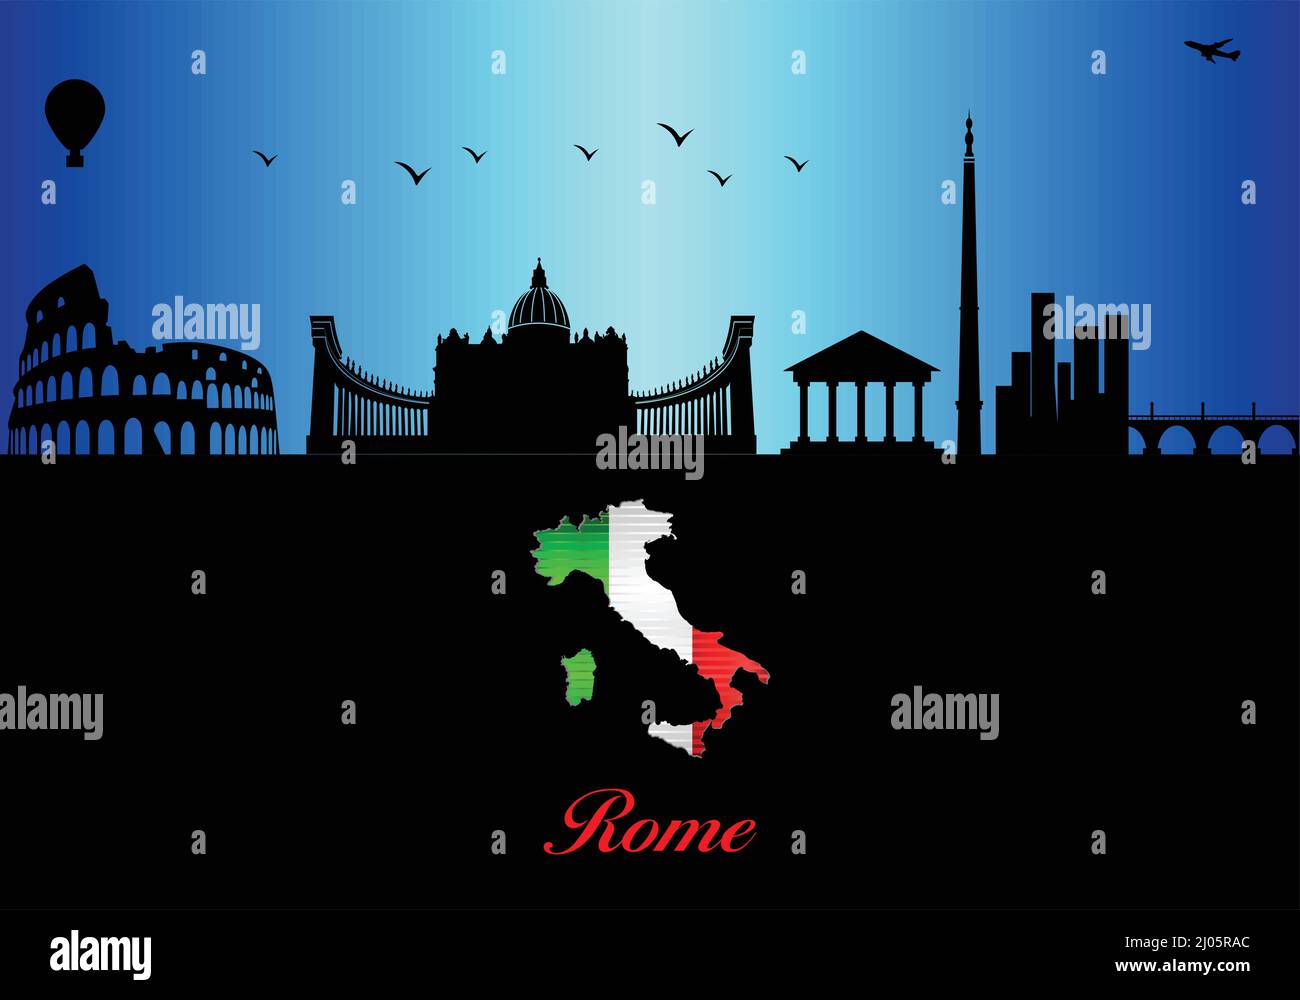 Rome City Skyline Silhouette Illustration Town In Blue Background